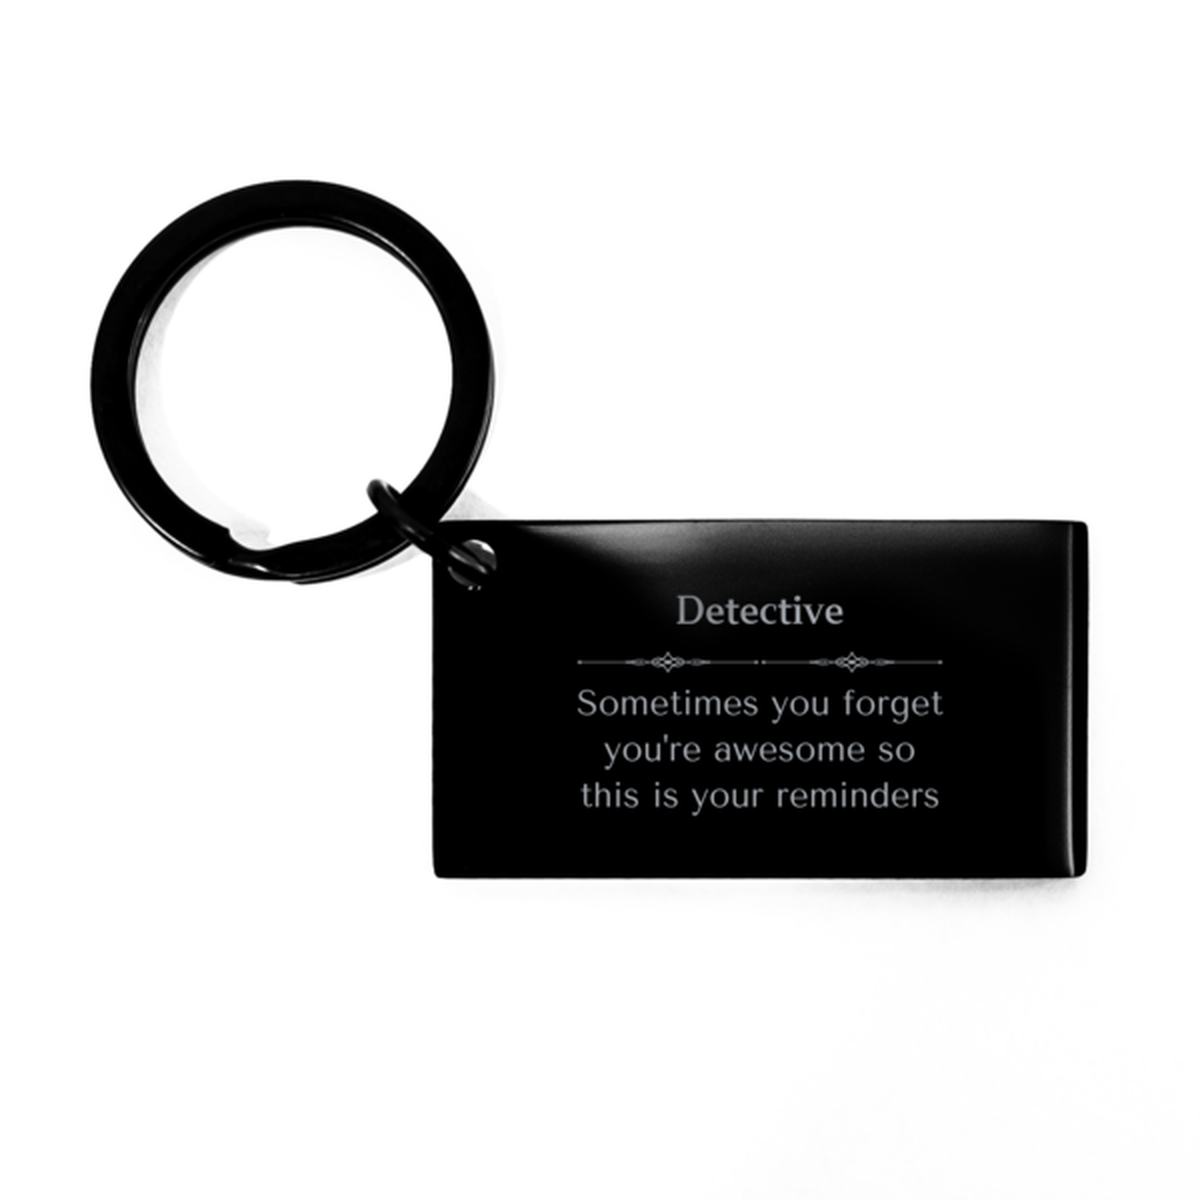 Sentimental Detective Keychain, Groundskeeper Sometimes you forget you're awesome so this is your reminders, Graduation Christmas Birthday Gifts for Detective, Men, Women, Coworkers